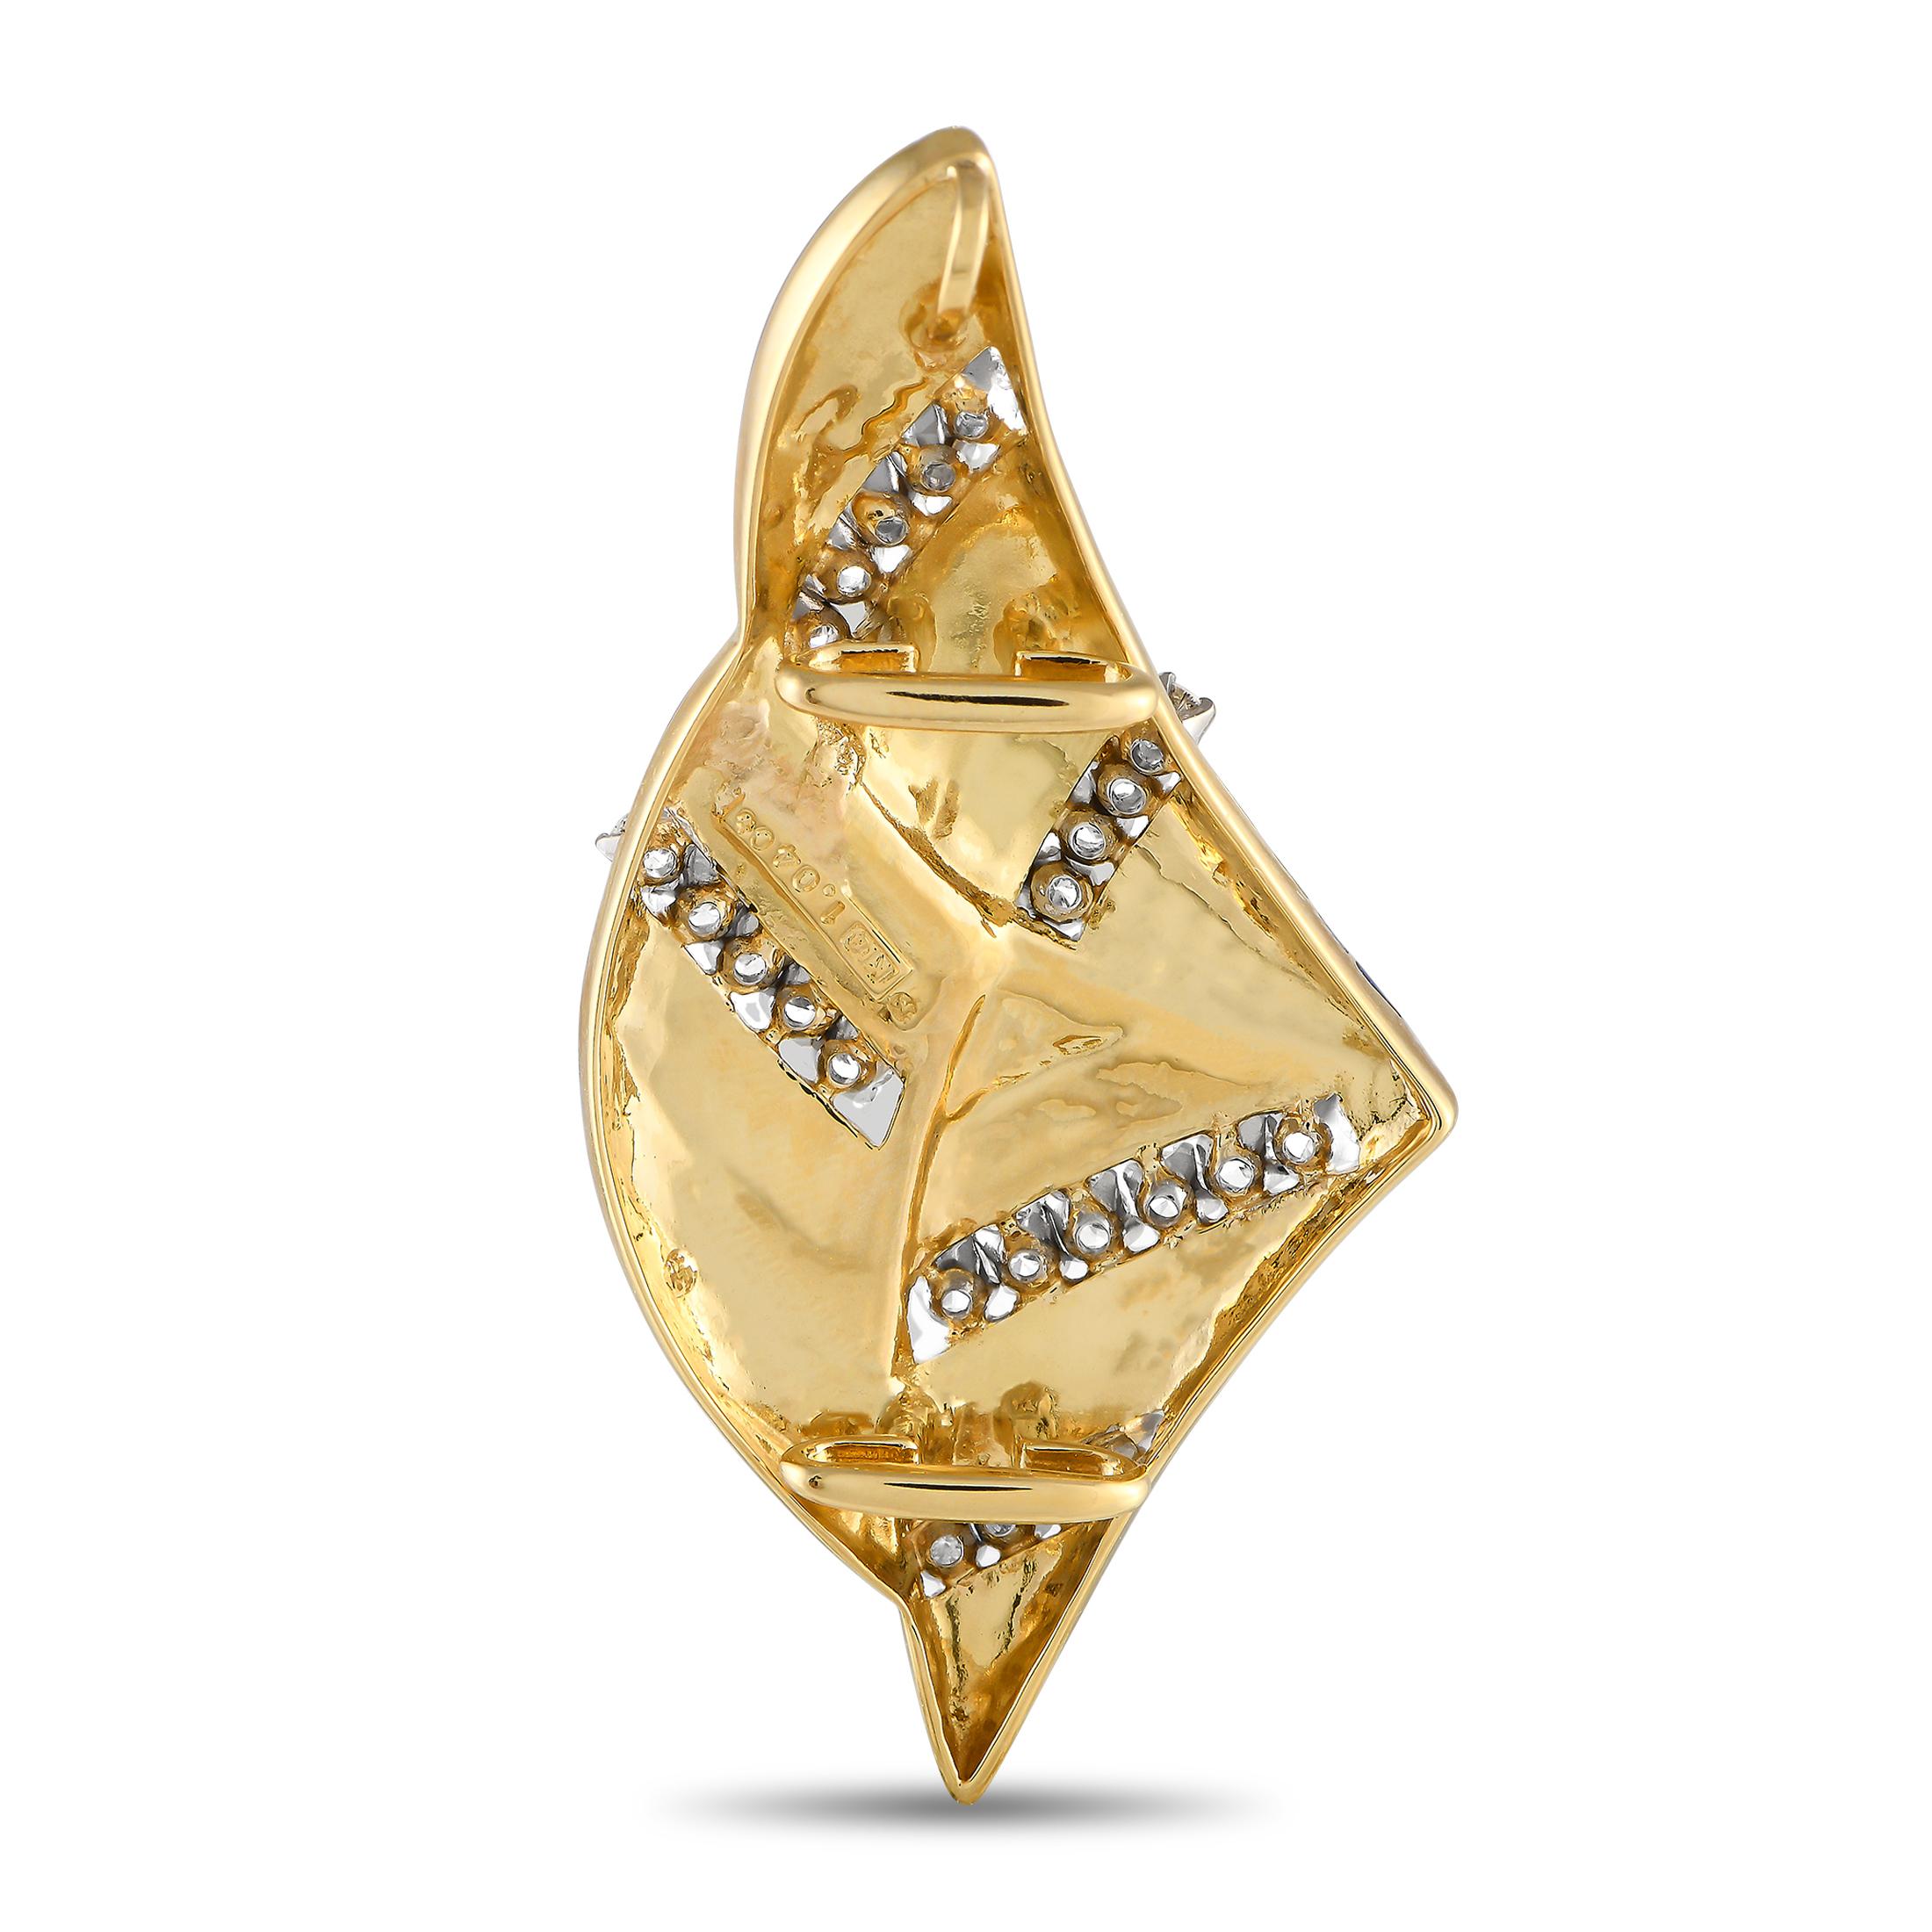 Crafted in 18K yellow gold, here is a rare Mikimoto Art Deco-inspired pendant with diamond accents ready to put a fashionable spin into your looks. The pendant features wide strips of blue enamel traced with yellow gold and ribbons of round